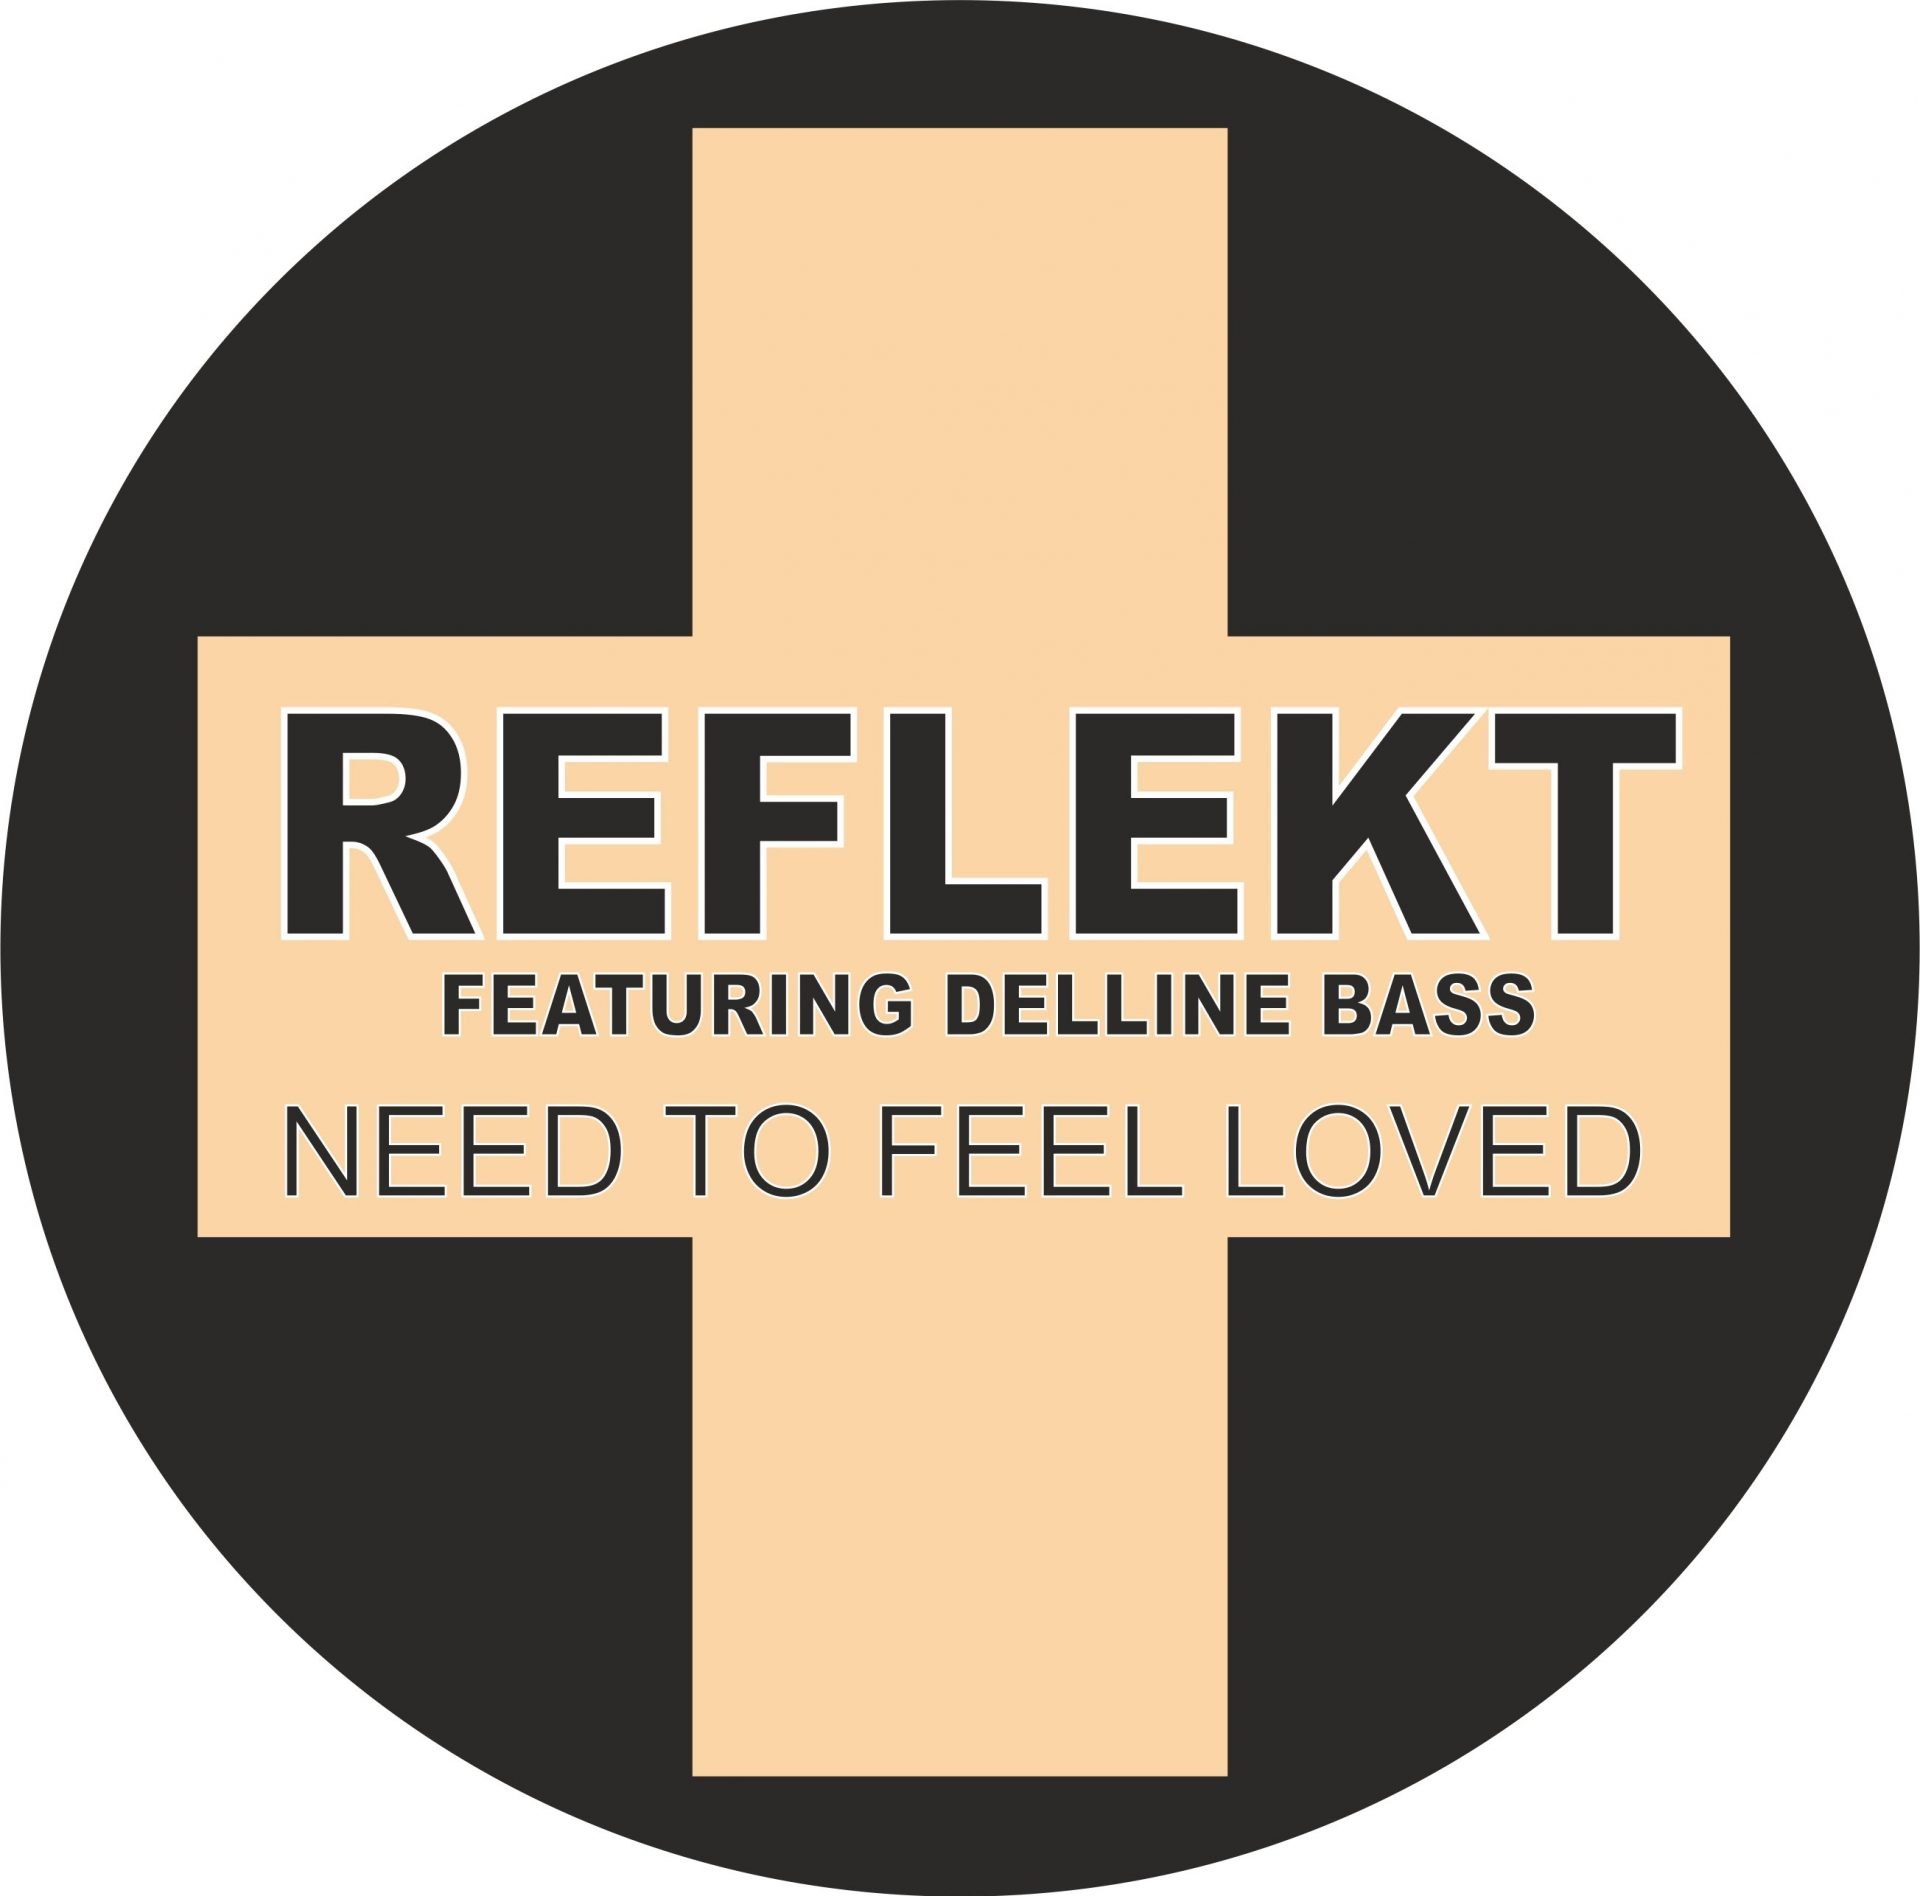 Delline bass need to feel loved. Reflekt ft. Delline Bass need to feel Loved. Reflekt feat. Delline Bass. Reflekt need to feel Loved. Adam k Soha need to feel Loved.